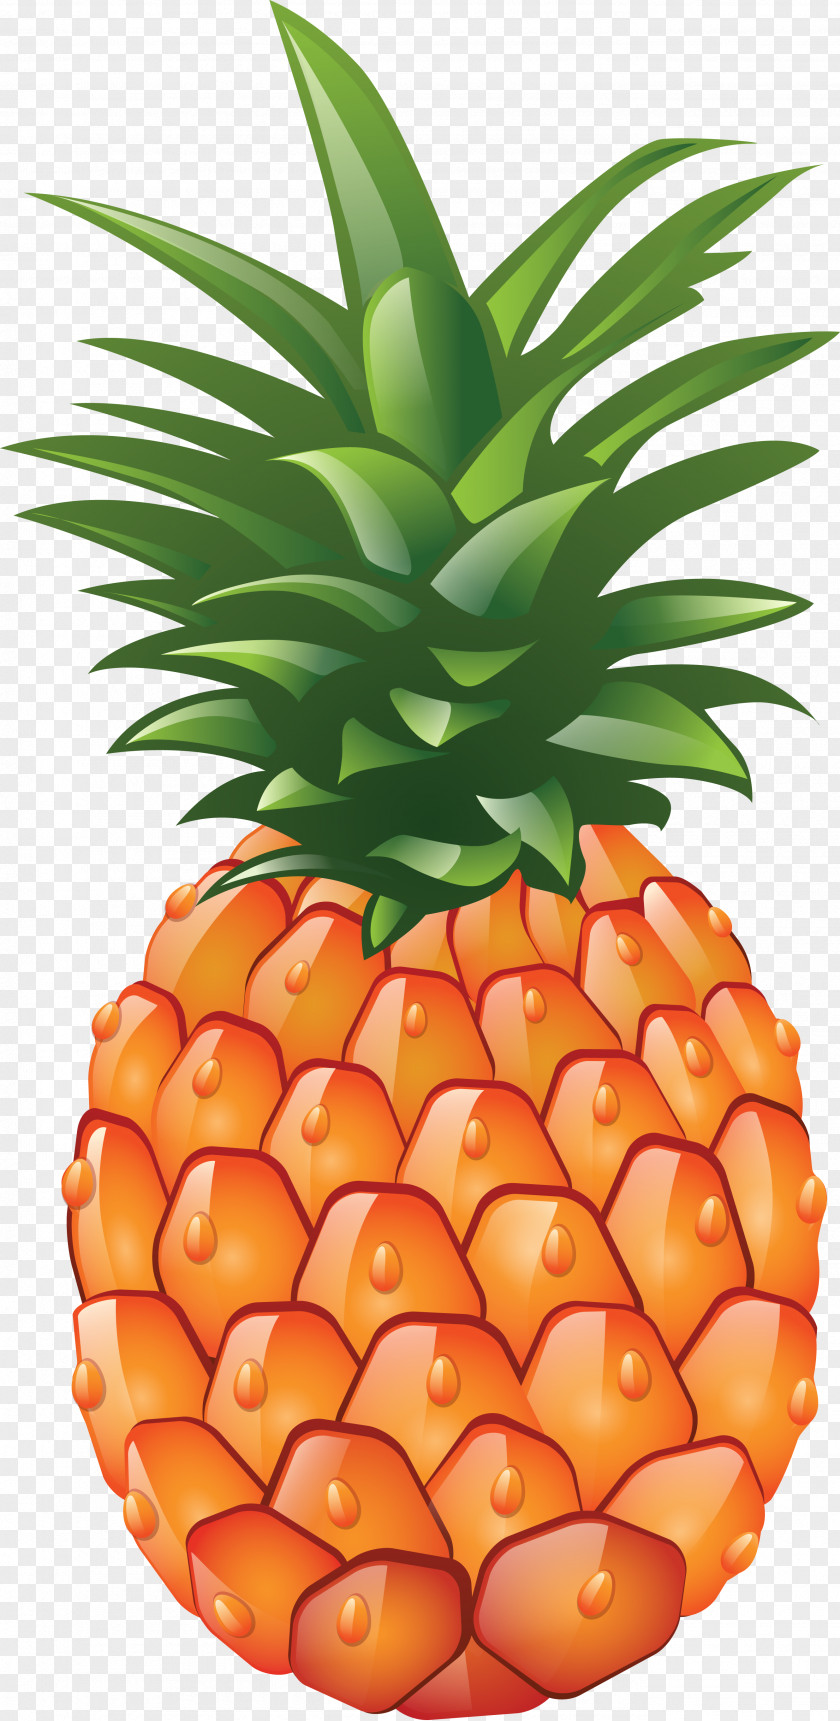 Pineapple Image, Free Download Juice Icon PNG